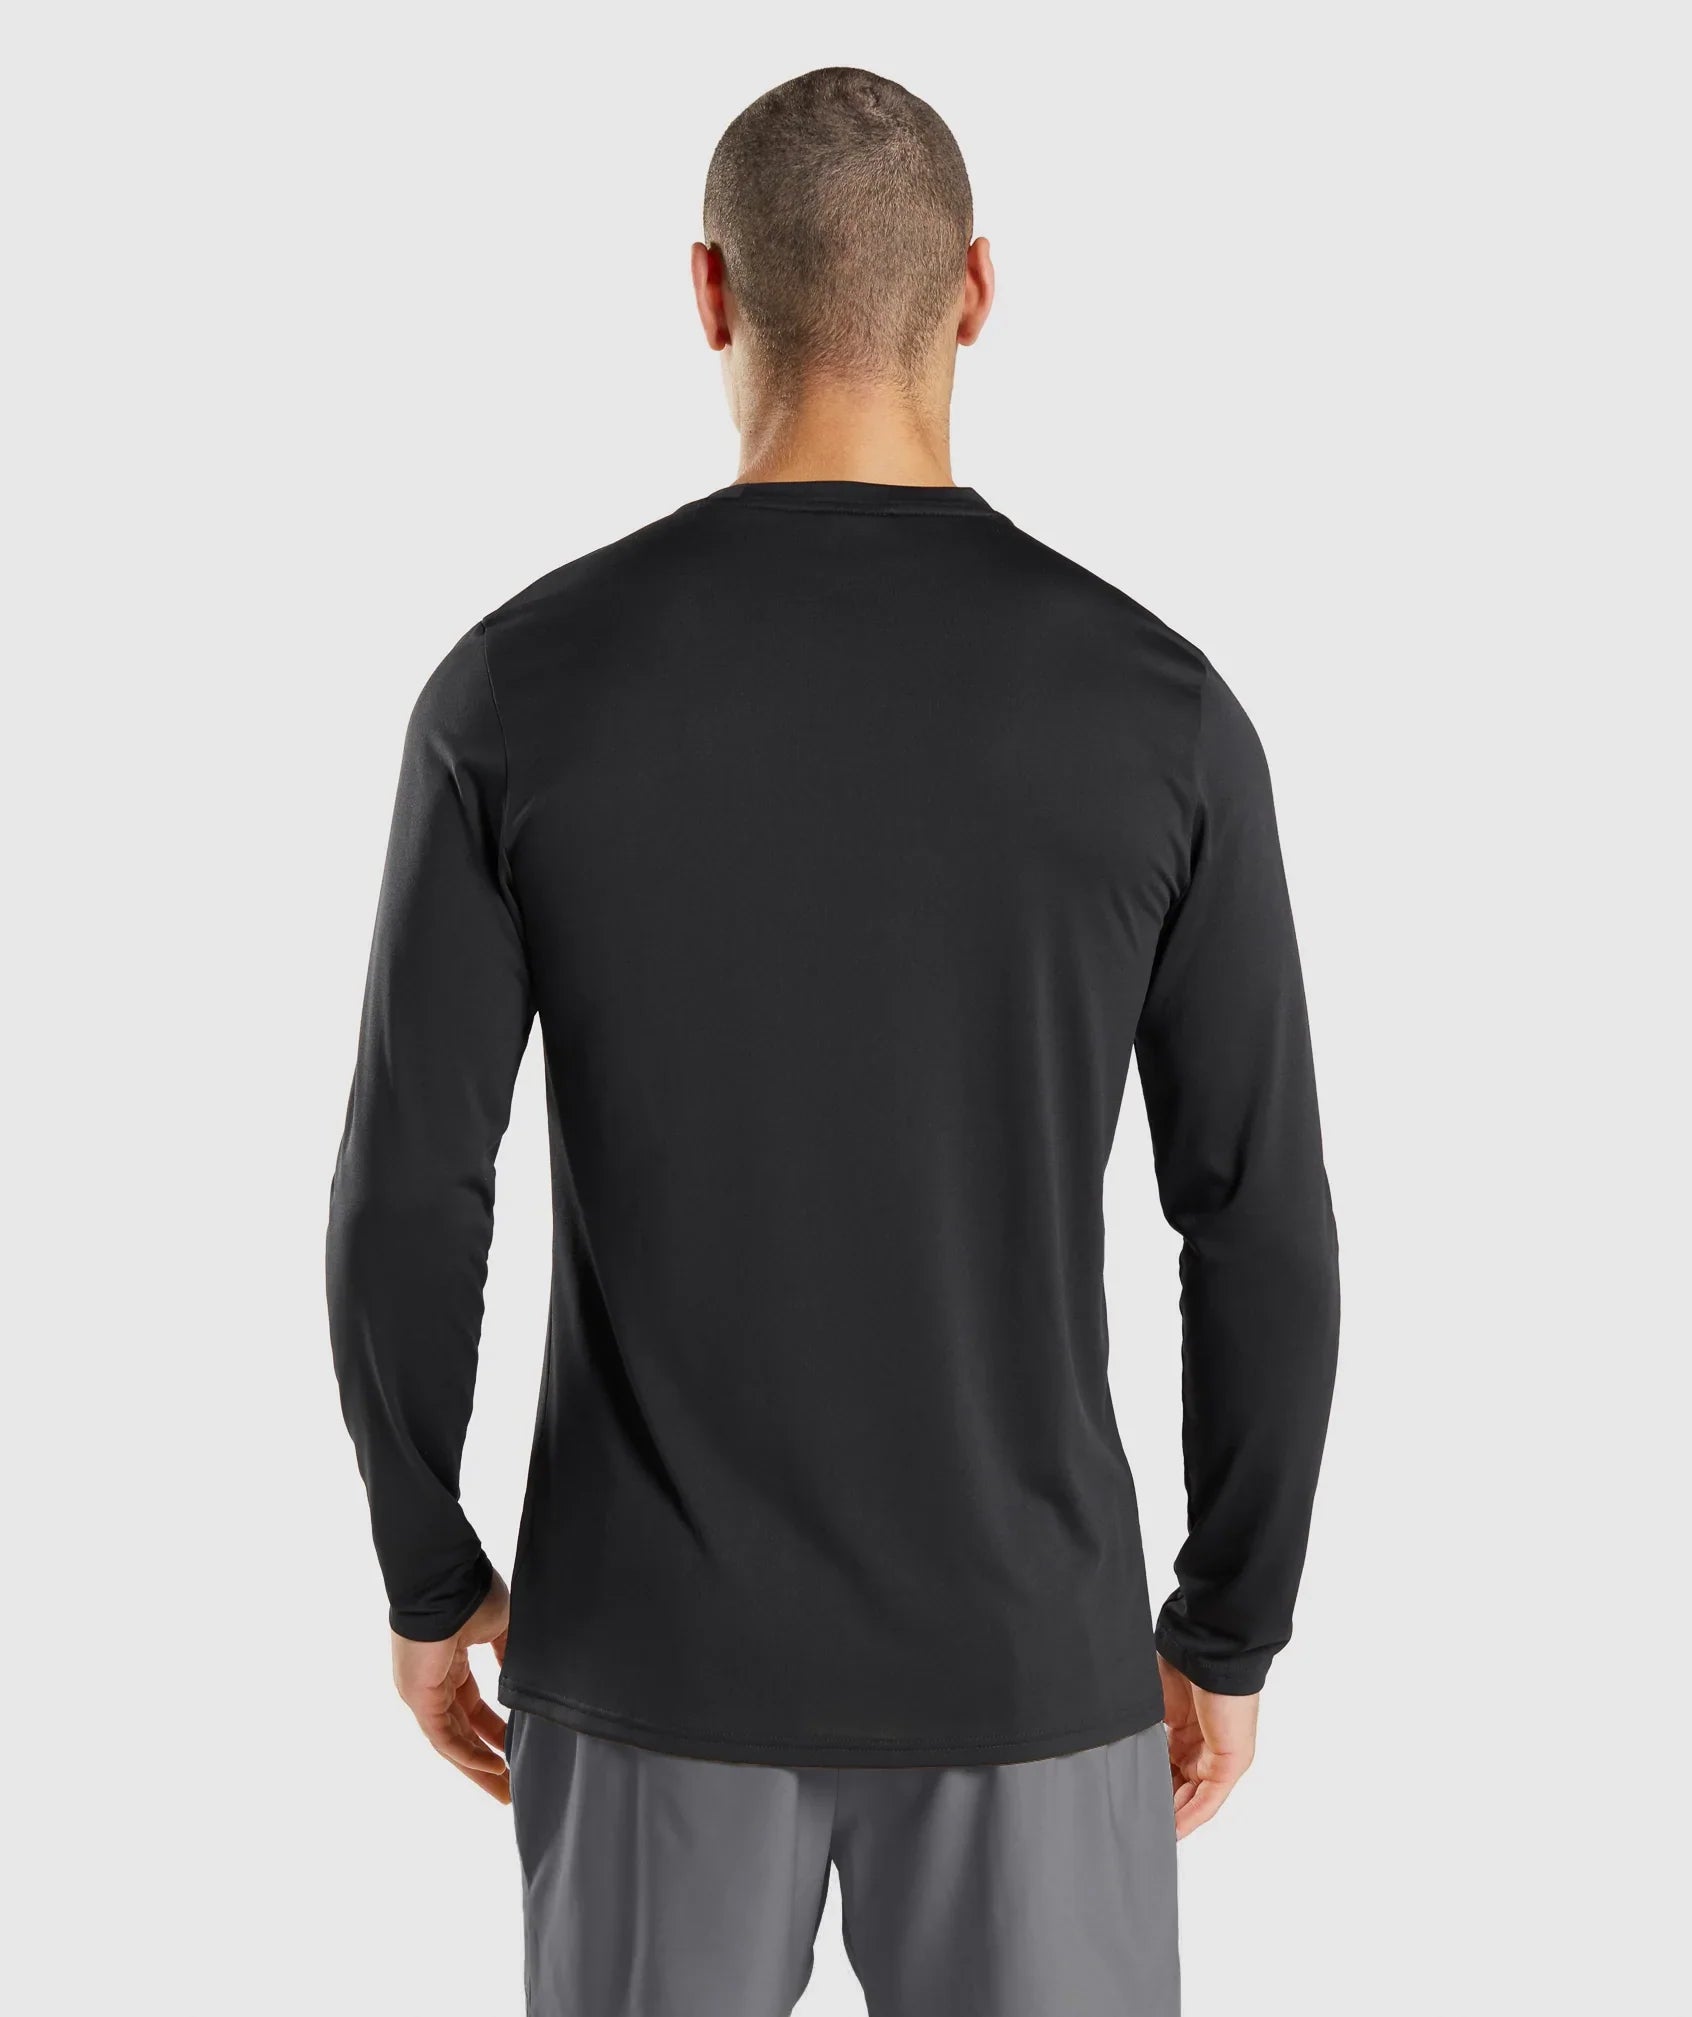 Arrival Long Sleeve T-Shirt in Black - view 2